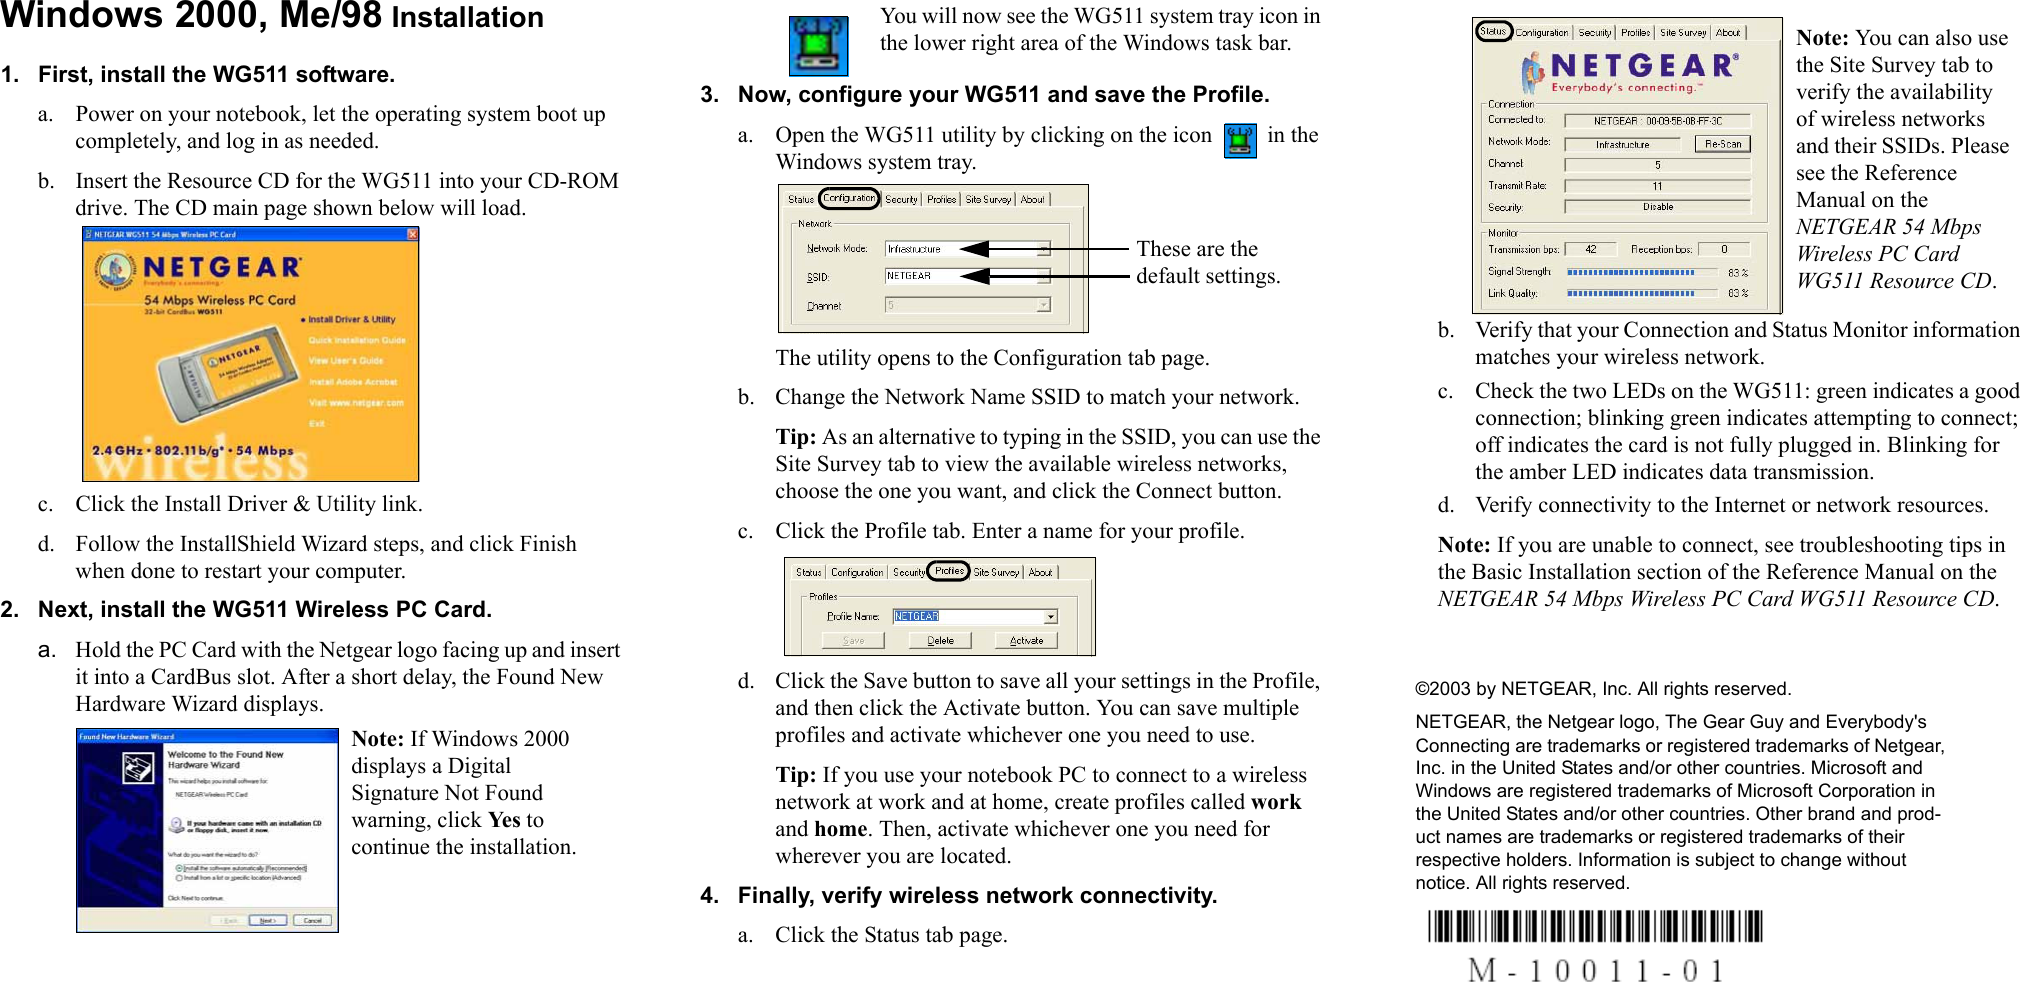 Windows 2000, Me/98 Installation1. First, install the WG511 software.a. Power on your notebook, let the operating system boot up completely, and log in as needed. b. Insert the Resource CD for the WG511 into your CD-ROM drive. The CD main page shown below will load. c. Click the Install Driver &amp; Utility link. d. Follow the InstallShield Wizard steps, and click Finish when done to restart your computer.2. Next, install the WG511 Wireless PC Card. a. Hold the PC Card with the Netgear logo facing up and insert it into a CardBus slot. After a short delay, the Found New Hardware Wizard displays. You will now see the WG511 system tray icon in the lower right area of the Windows task bar.3. Now, configure your WG511 and save the Profile.a. Open the WG511 utility by clicking on the icon   in the Windows system tray.The utility opens to the Configuration tab page. b. Change the Network Name SSID to match your network.Tip: As an alternative to typing in the SSID, you can use the Site Survey tab to view the available wireless networks, choose the one you want, and click the Connect button.c. Click the Profile tab. Enter a name for your profile.d. Click the Save button to save all your settings in the Profile, and then click the Activate button. You can save multiple profiles and activate whichever one you need to use.Tip: If you use your notebook PC to connect to a wireless network at work and at home, create profiles called work and home. Then, activate whichever one you need for wherever you are located.4. Finally, verify wireless network connectivity.a. Click the Status tab page.b. Verify that your Connection and Status Monitor information matches your wireless network. c. Check the two LEDs on the WG511: green indicates a good connection; blinking green indicates attempting to connect; off indicates the card is not fully plugged in. Blinking for the amber LED indicates data transmission. d. Verify connectivity to the Internet or network resources.Note: If you are unable to connect, see troubleshooting tips in the Basic Installation section of the Reference Manual on the NETGEAR 54 Mbps Wireless PC Card WG511 Resource CD. ©2003 by NETGEAR, Inc. All rights reserved.NETGEAR, the Netgear logo, The Gear Guy and Everybody&apos;s Connecting are trademarks or registered trademarks of Netgear, Inc. in the United States and/or other countries. Microsoft and Windows are registered trademarks of Microsoft Corporation in the United States and/or other countries. Other brand and prod-uct names are trademarks or registered trademarks of their respective holders. Information is subject to change without notice. All rights reserved.Note: If Windows 2000 displays a Digital Signature Not Found warning, click Yes to continue the installation. These are the default settings.Note: You can also use the Site Survey tab to verify the availability of wireless networks and their SSIDs. Please see the Reference Manual on the NETGEAR 54 Mbps Wireless PC Card WG511 Resource CD. 